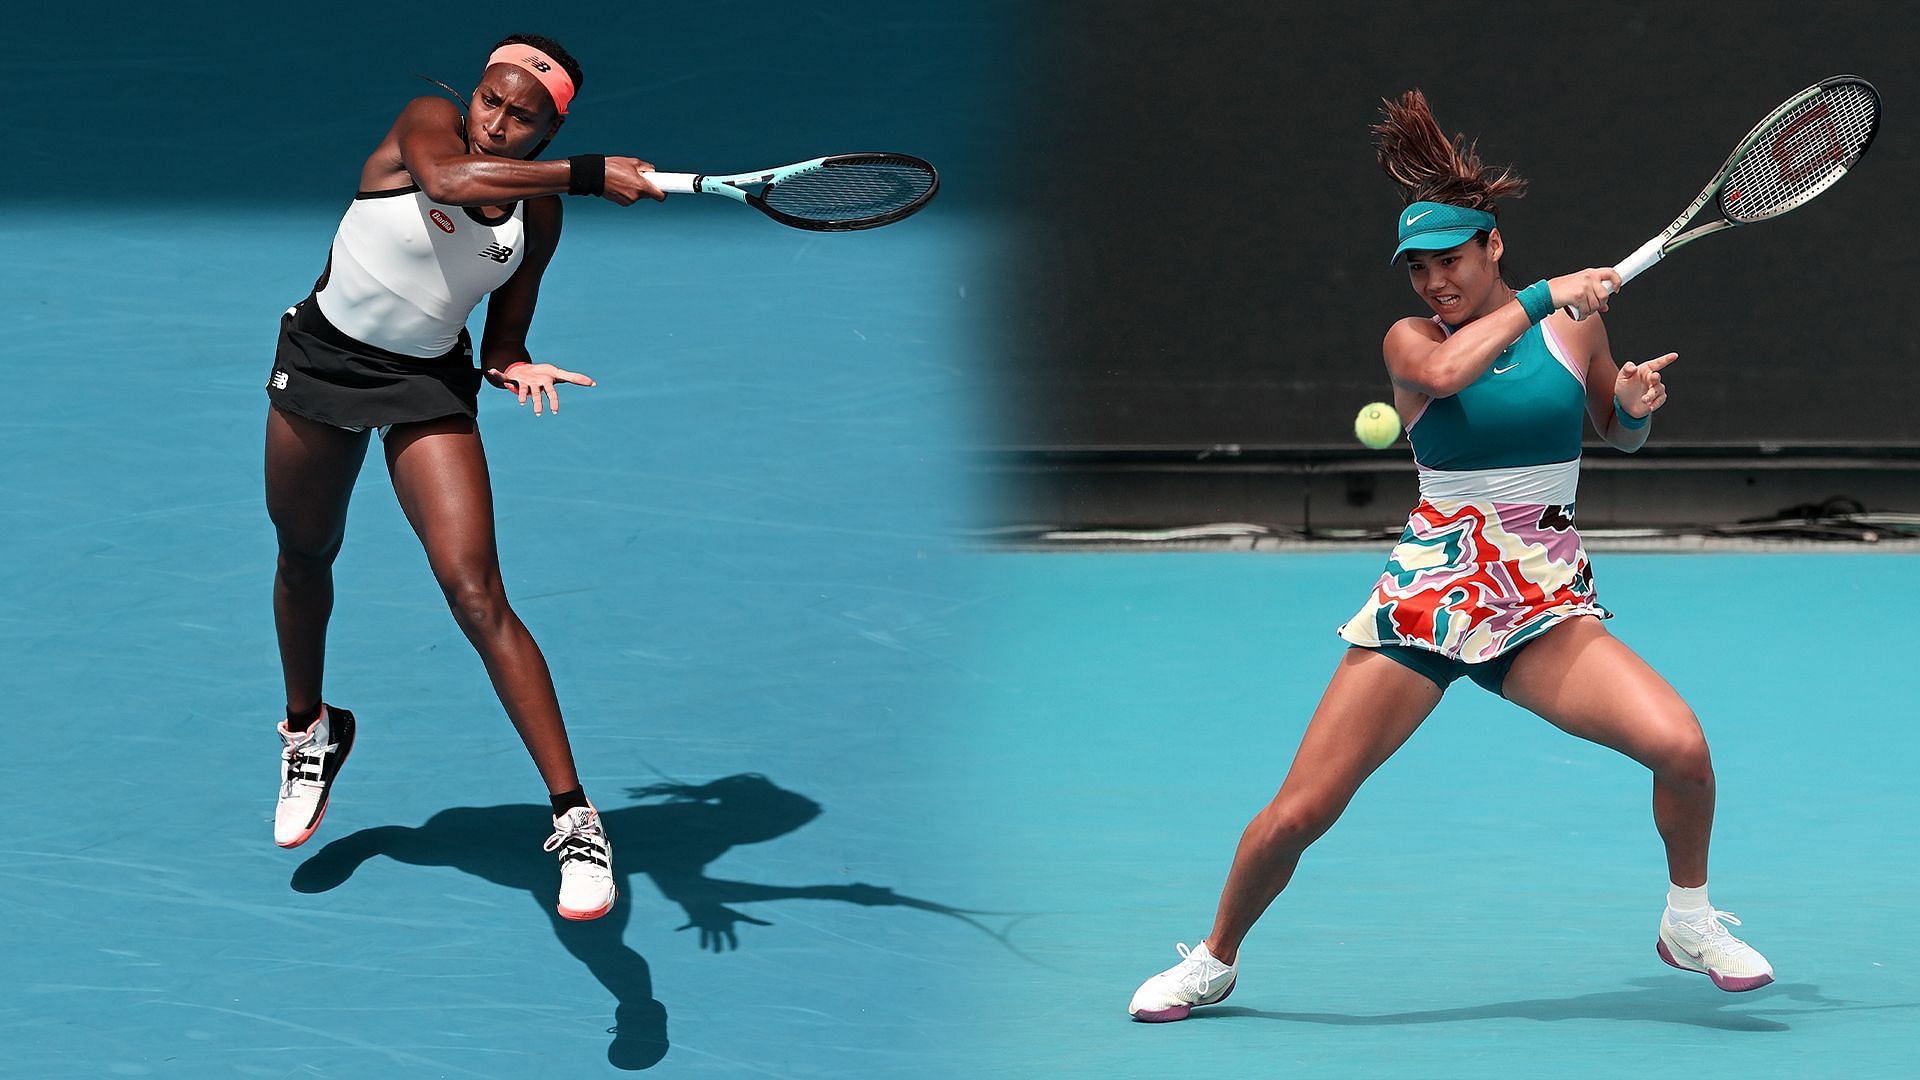 Coco Gauff vs Emma Raducanu: Where to watch, TV schedule, live streaming details and more | Australian Open 2023, Round 2